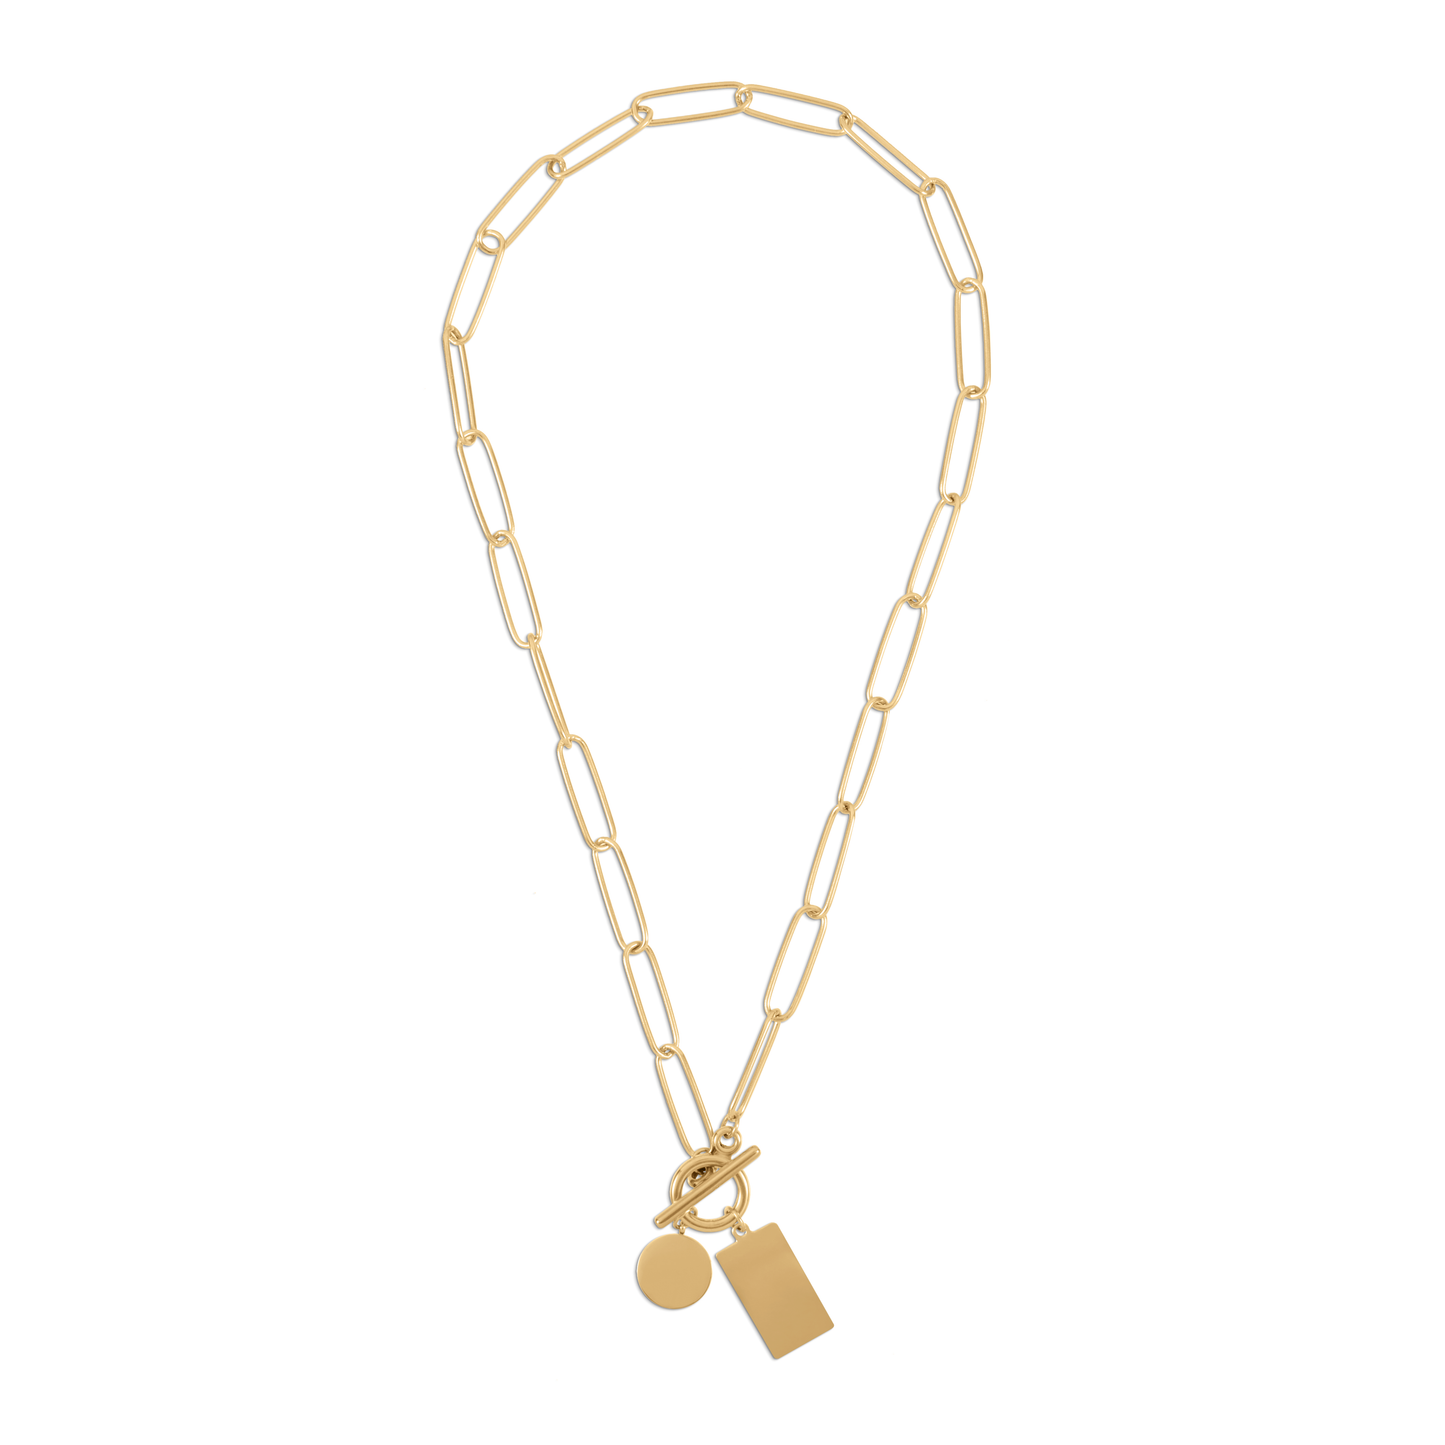 Ellie Vail - Kaylee Toggle Charm Necklace